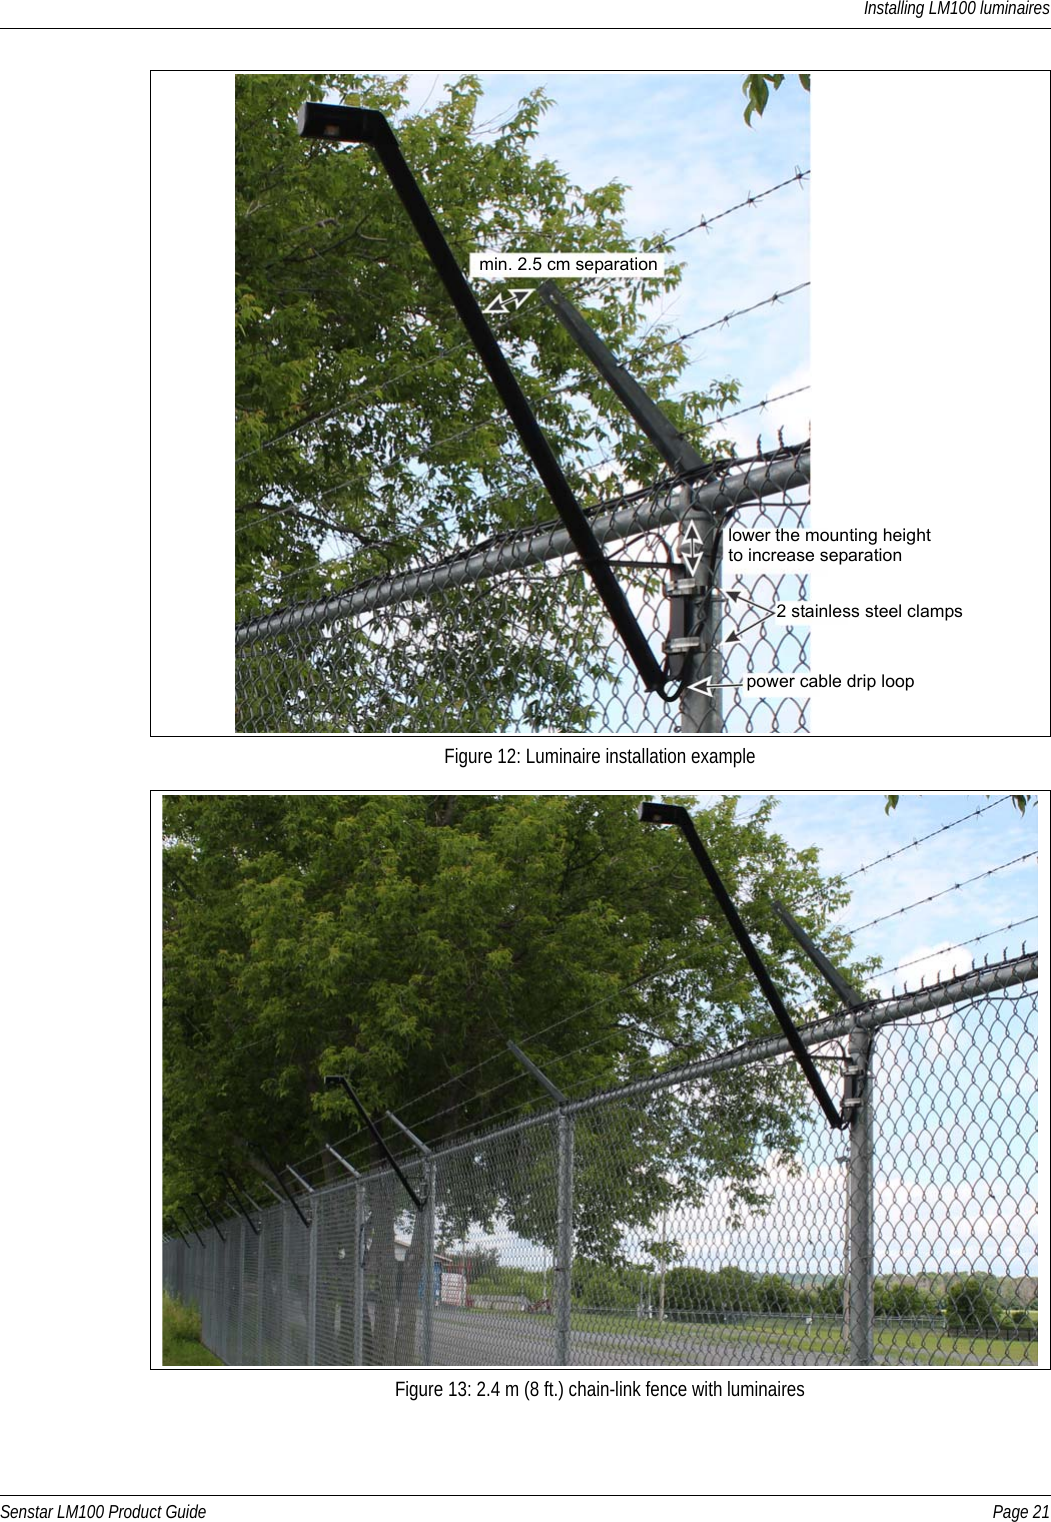 Installing LM100 luminairesSenstar LM100 Product Guide Page 21Figure 12: Luminaire installation exampleFigure 13: 2.4 m (8 ft.) chain-link fence with luminairesmin. 2.5 cm separationlower the mounting height2 stainless steel clampspower cable drip loop to increase separation